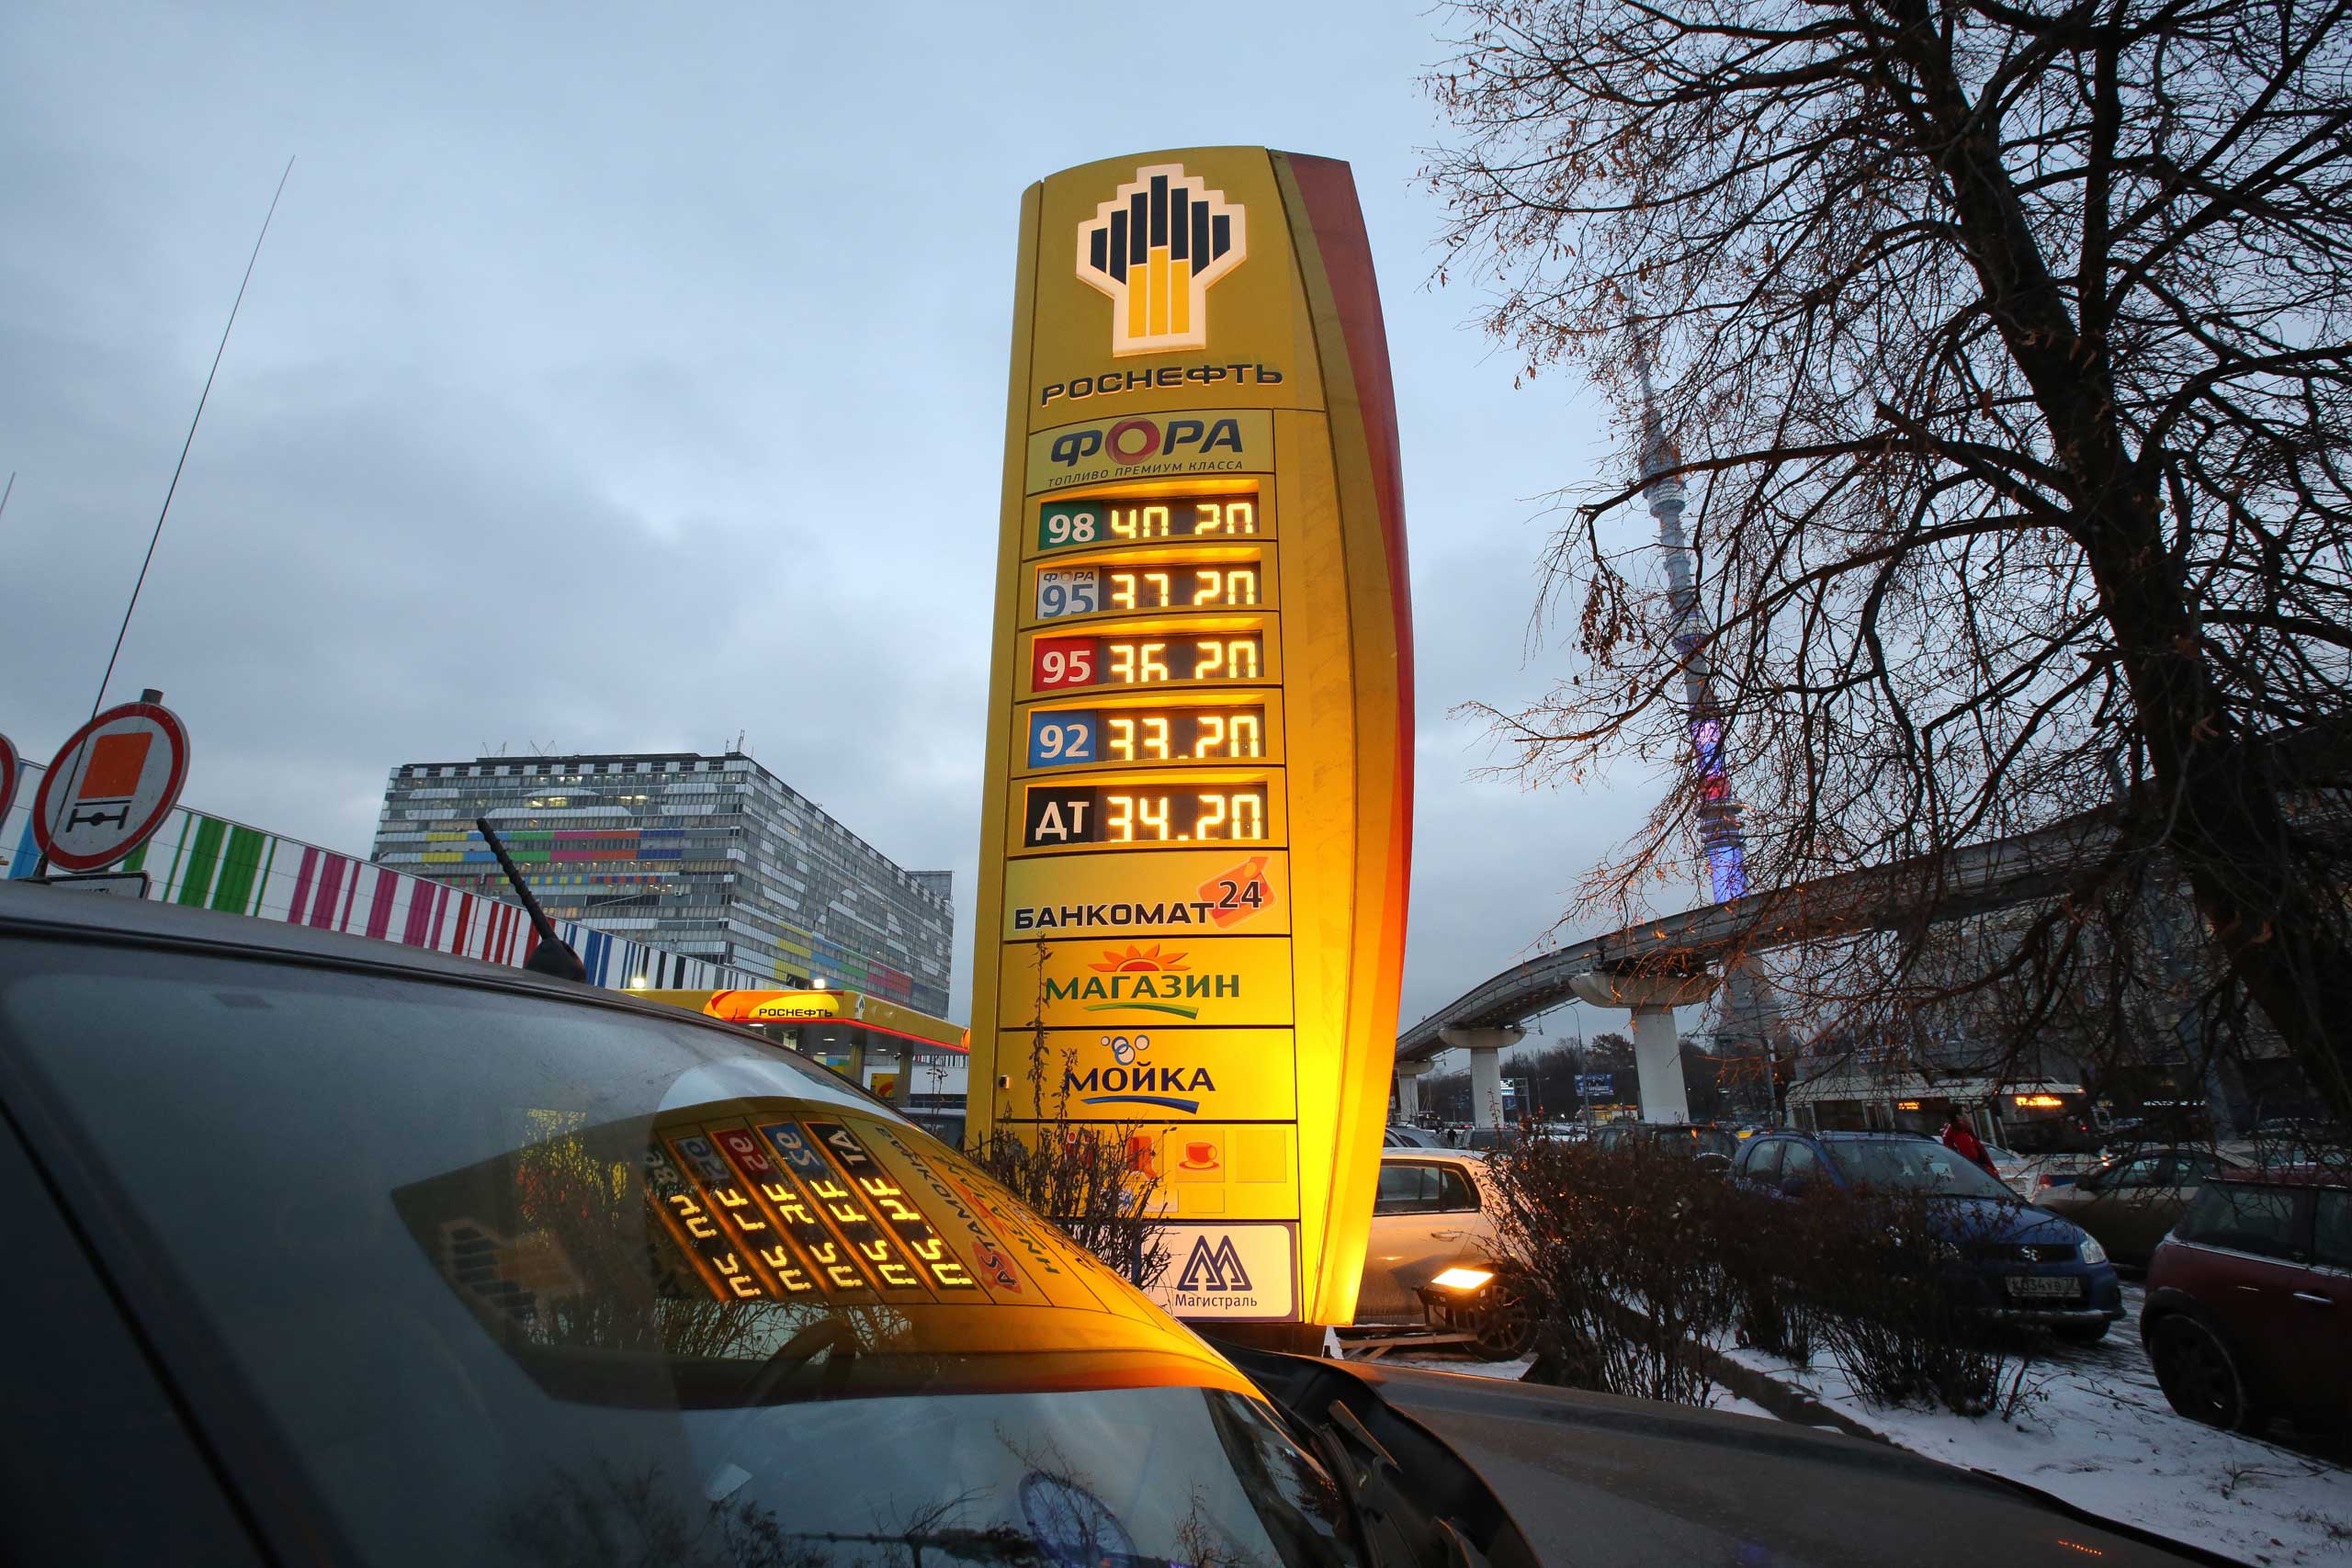 Ruble fuel prices sit on an illuminated electronic display board outside an OAO Rosneft gas station in Moscow, Dec. 2, 2014. (Andrey Rudakov—Bloomberg/Getty Images)